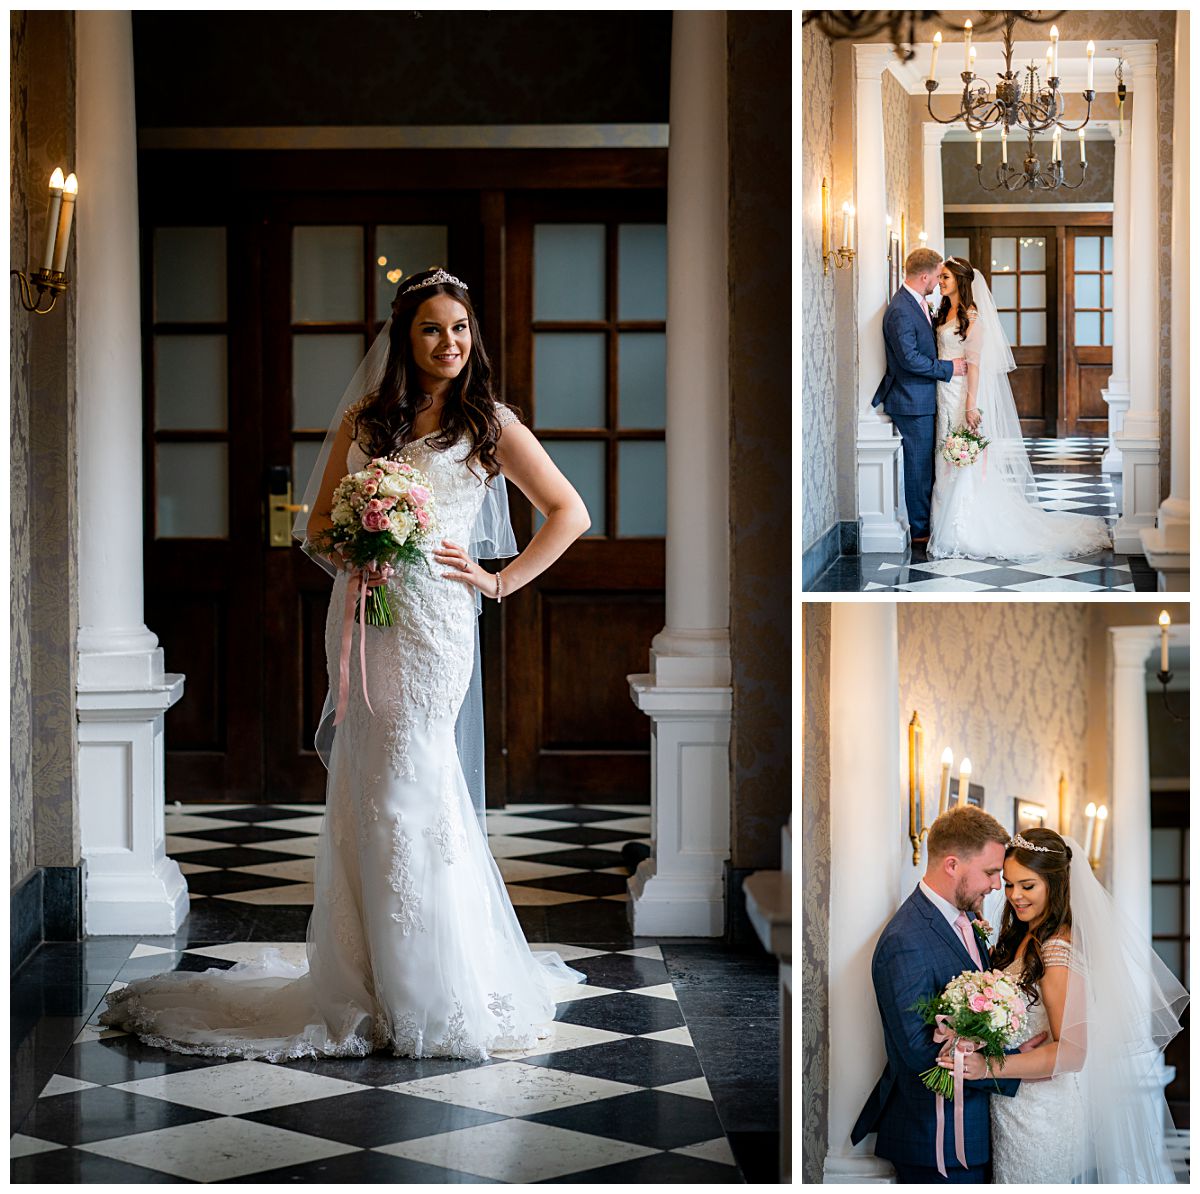 Professional Wedding Photography in Pontefract, Rothwell and Leeds, Oulton Hall